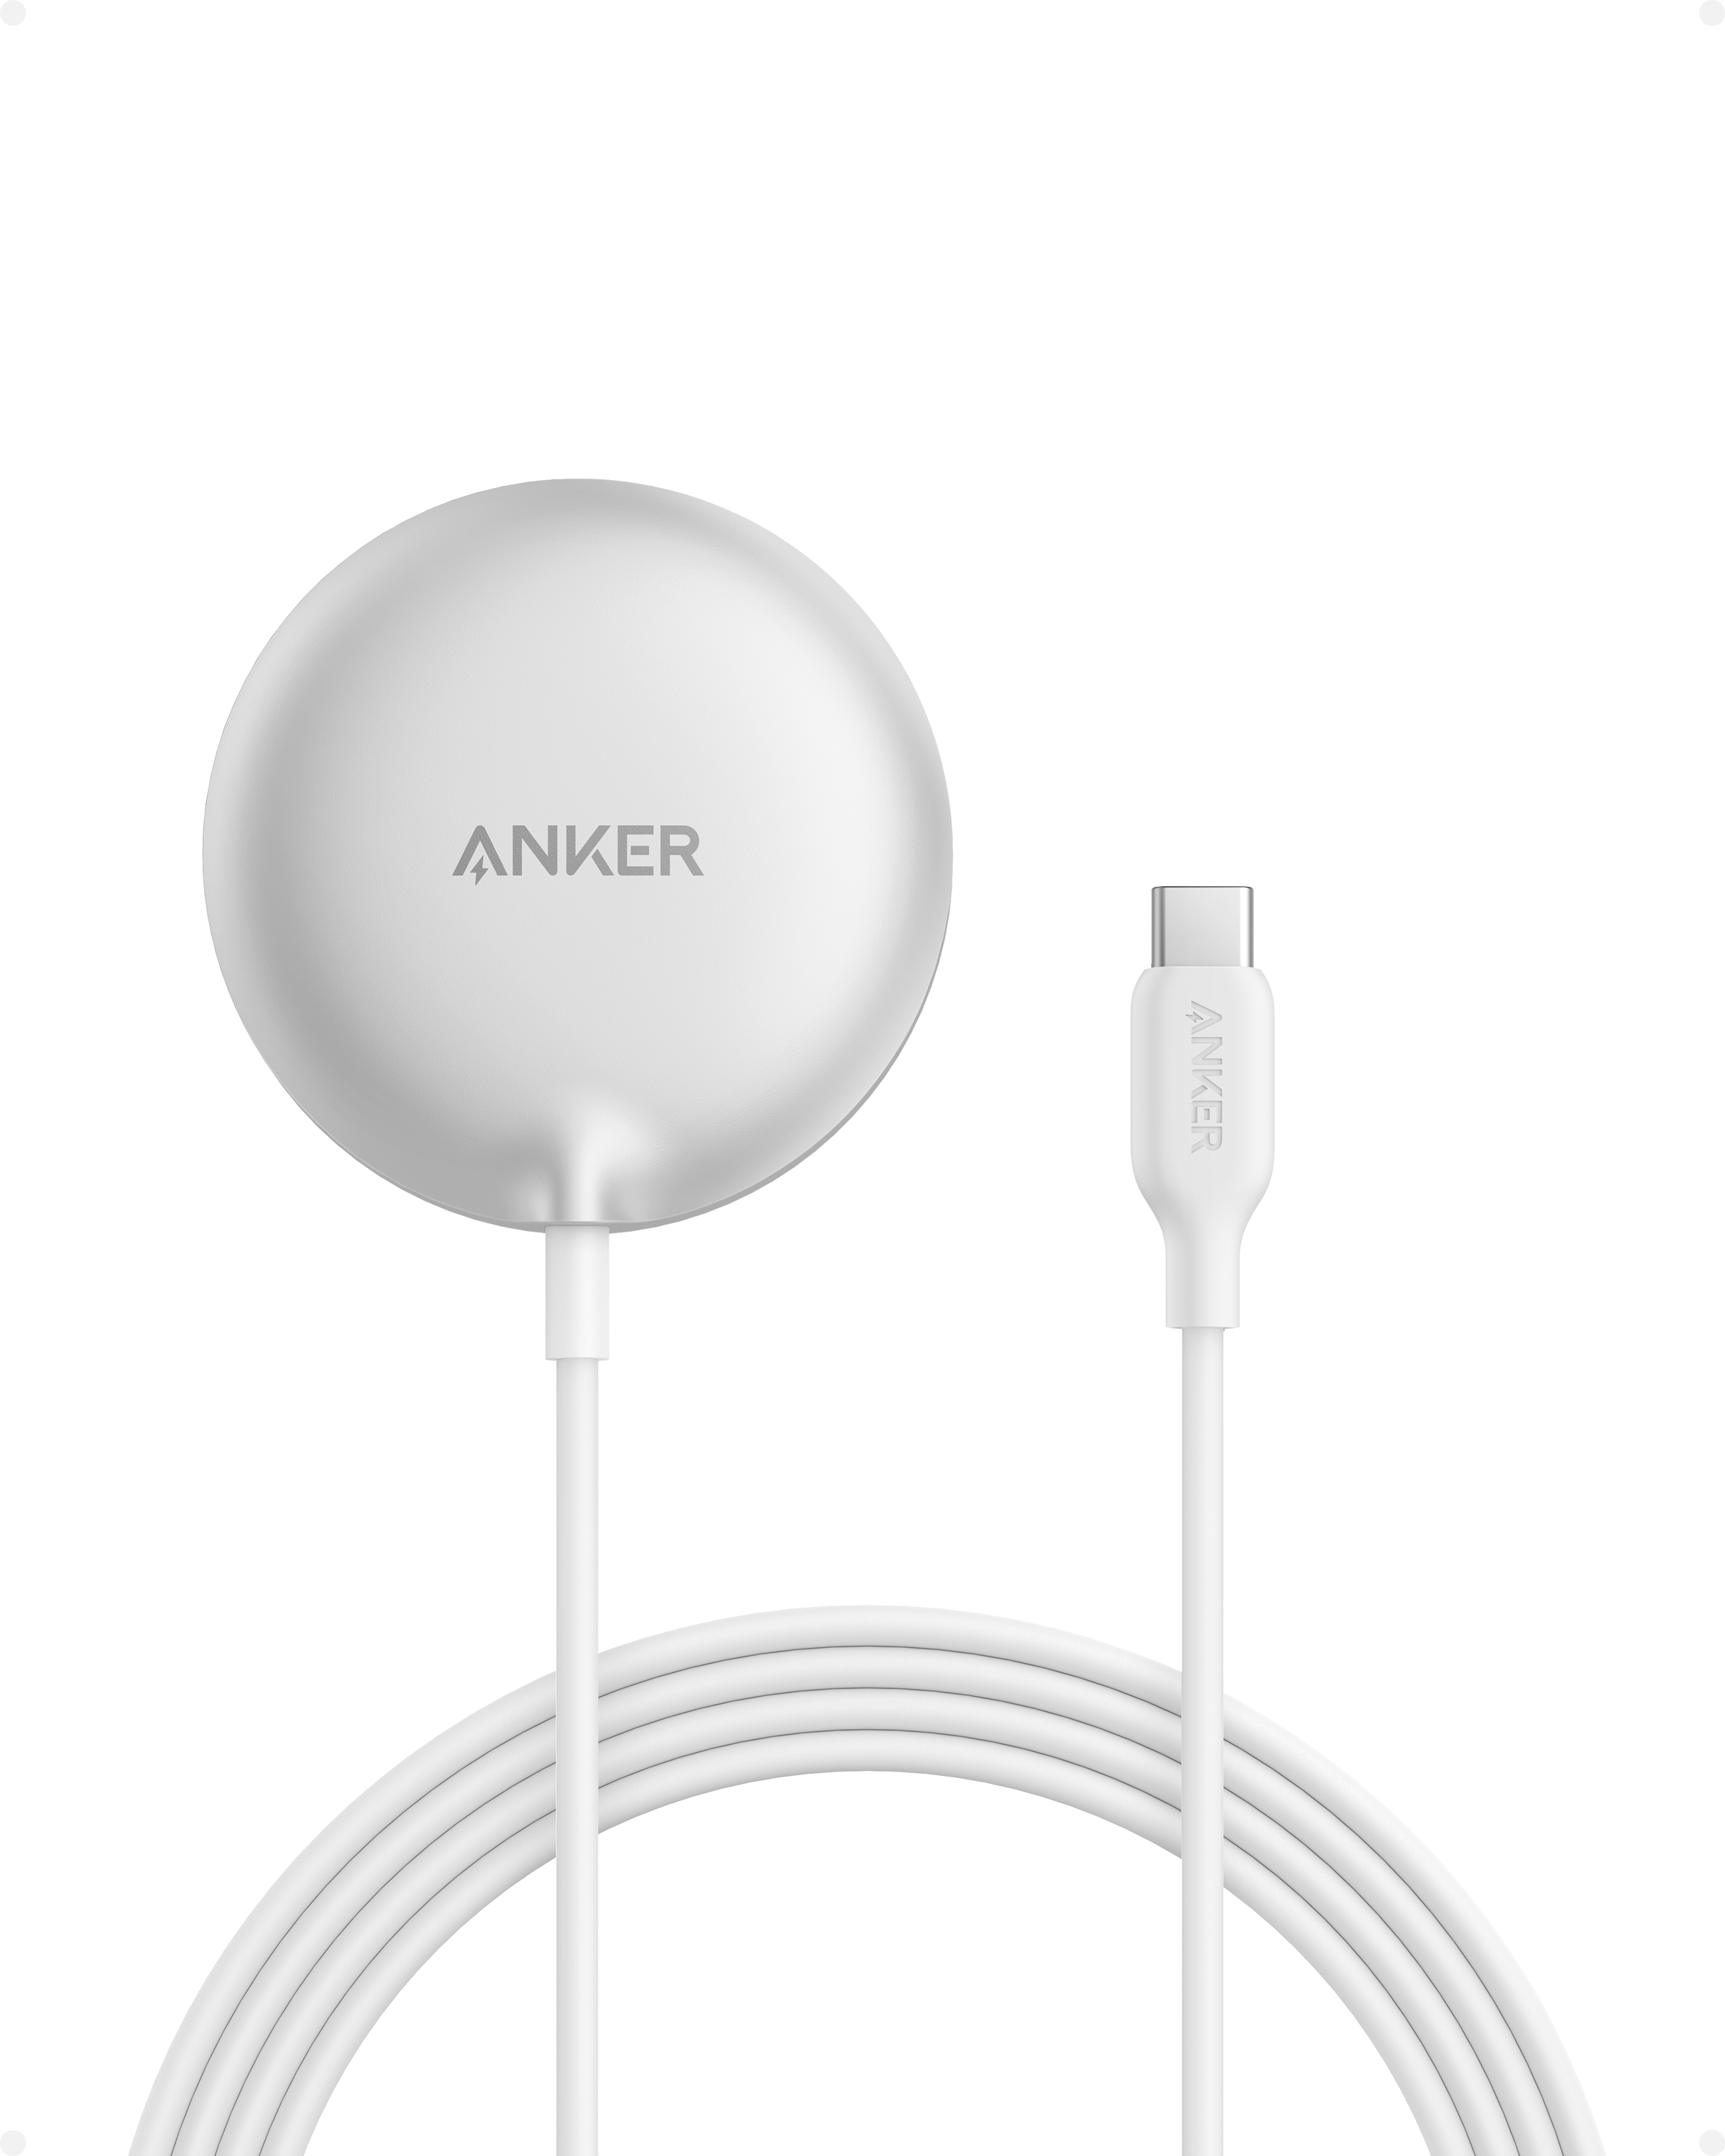 Anker | Live Charged. - Anker US